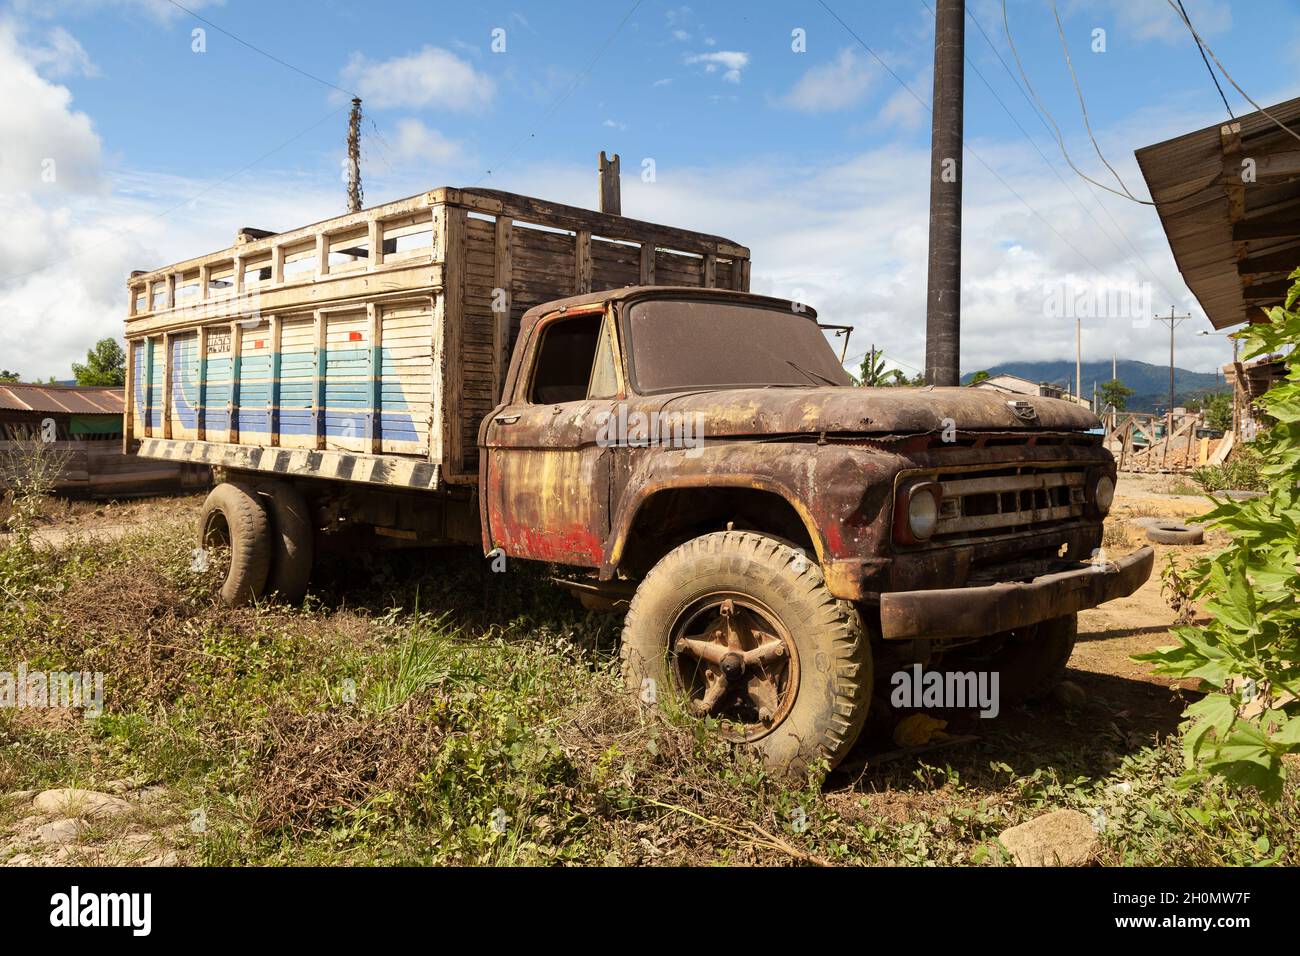 Pilcopata, Peru - April 12, 2014: An old, rusty and abandoned big truck, with veiled crystals, rests in the surroundings of the small town of Pilcopat Stock Photo